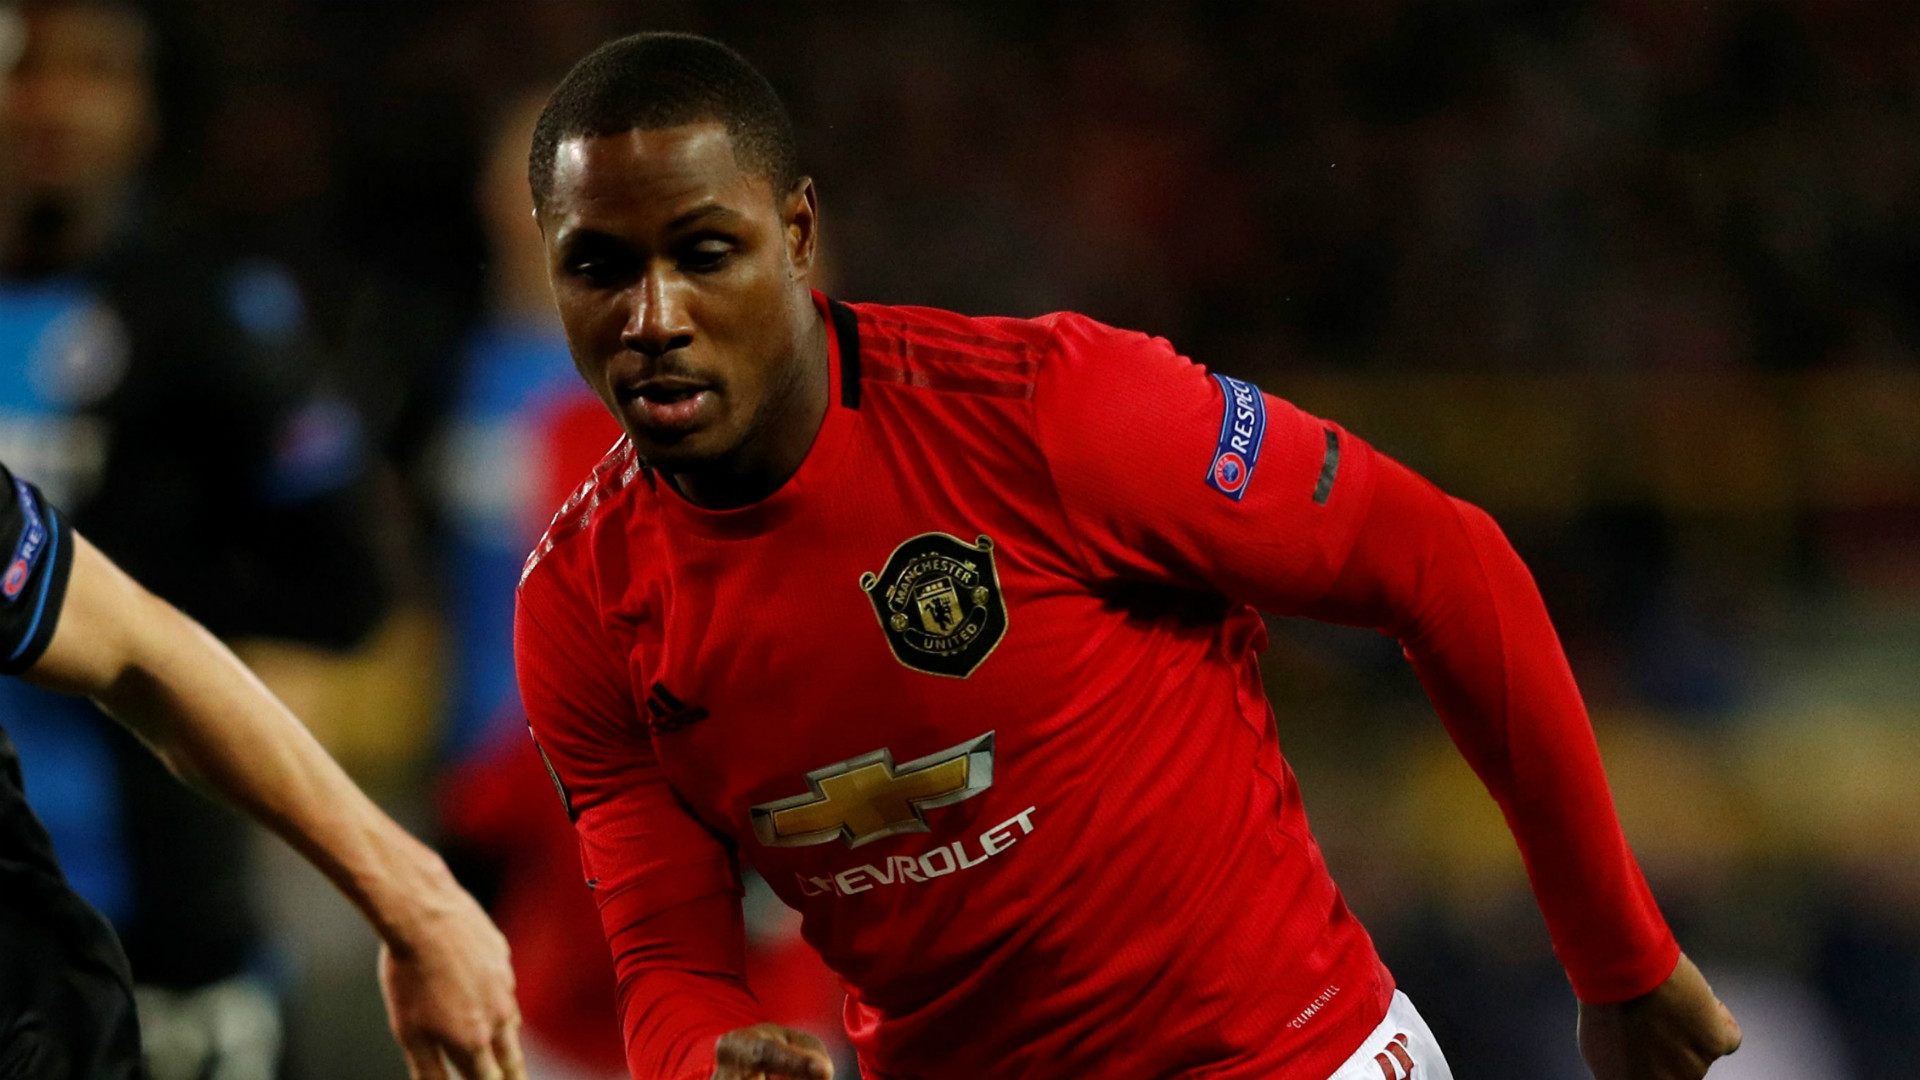 I will always cherish my first Manchester United goal - Odion Ighalo